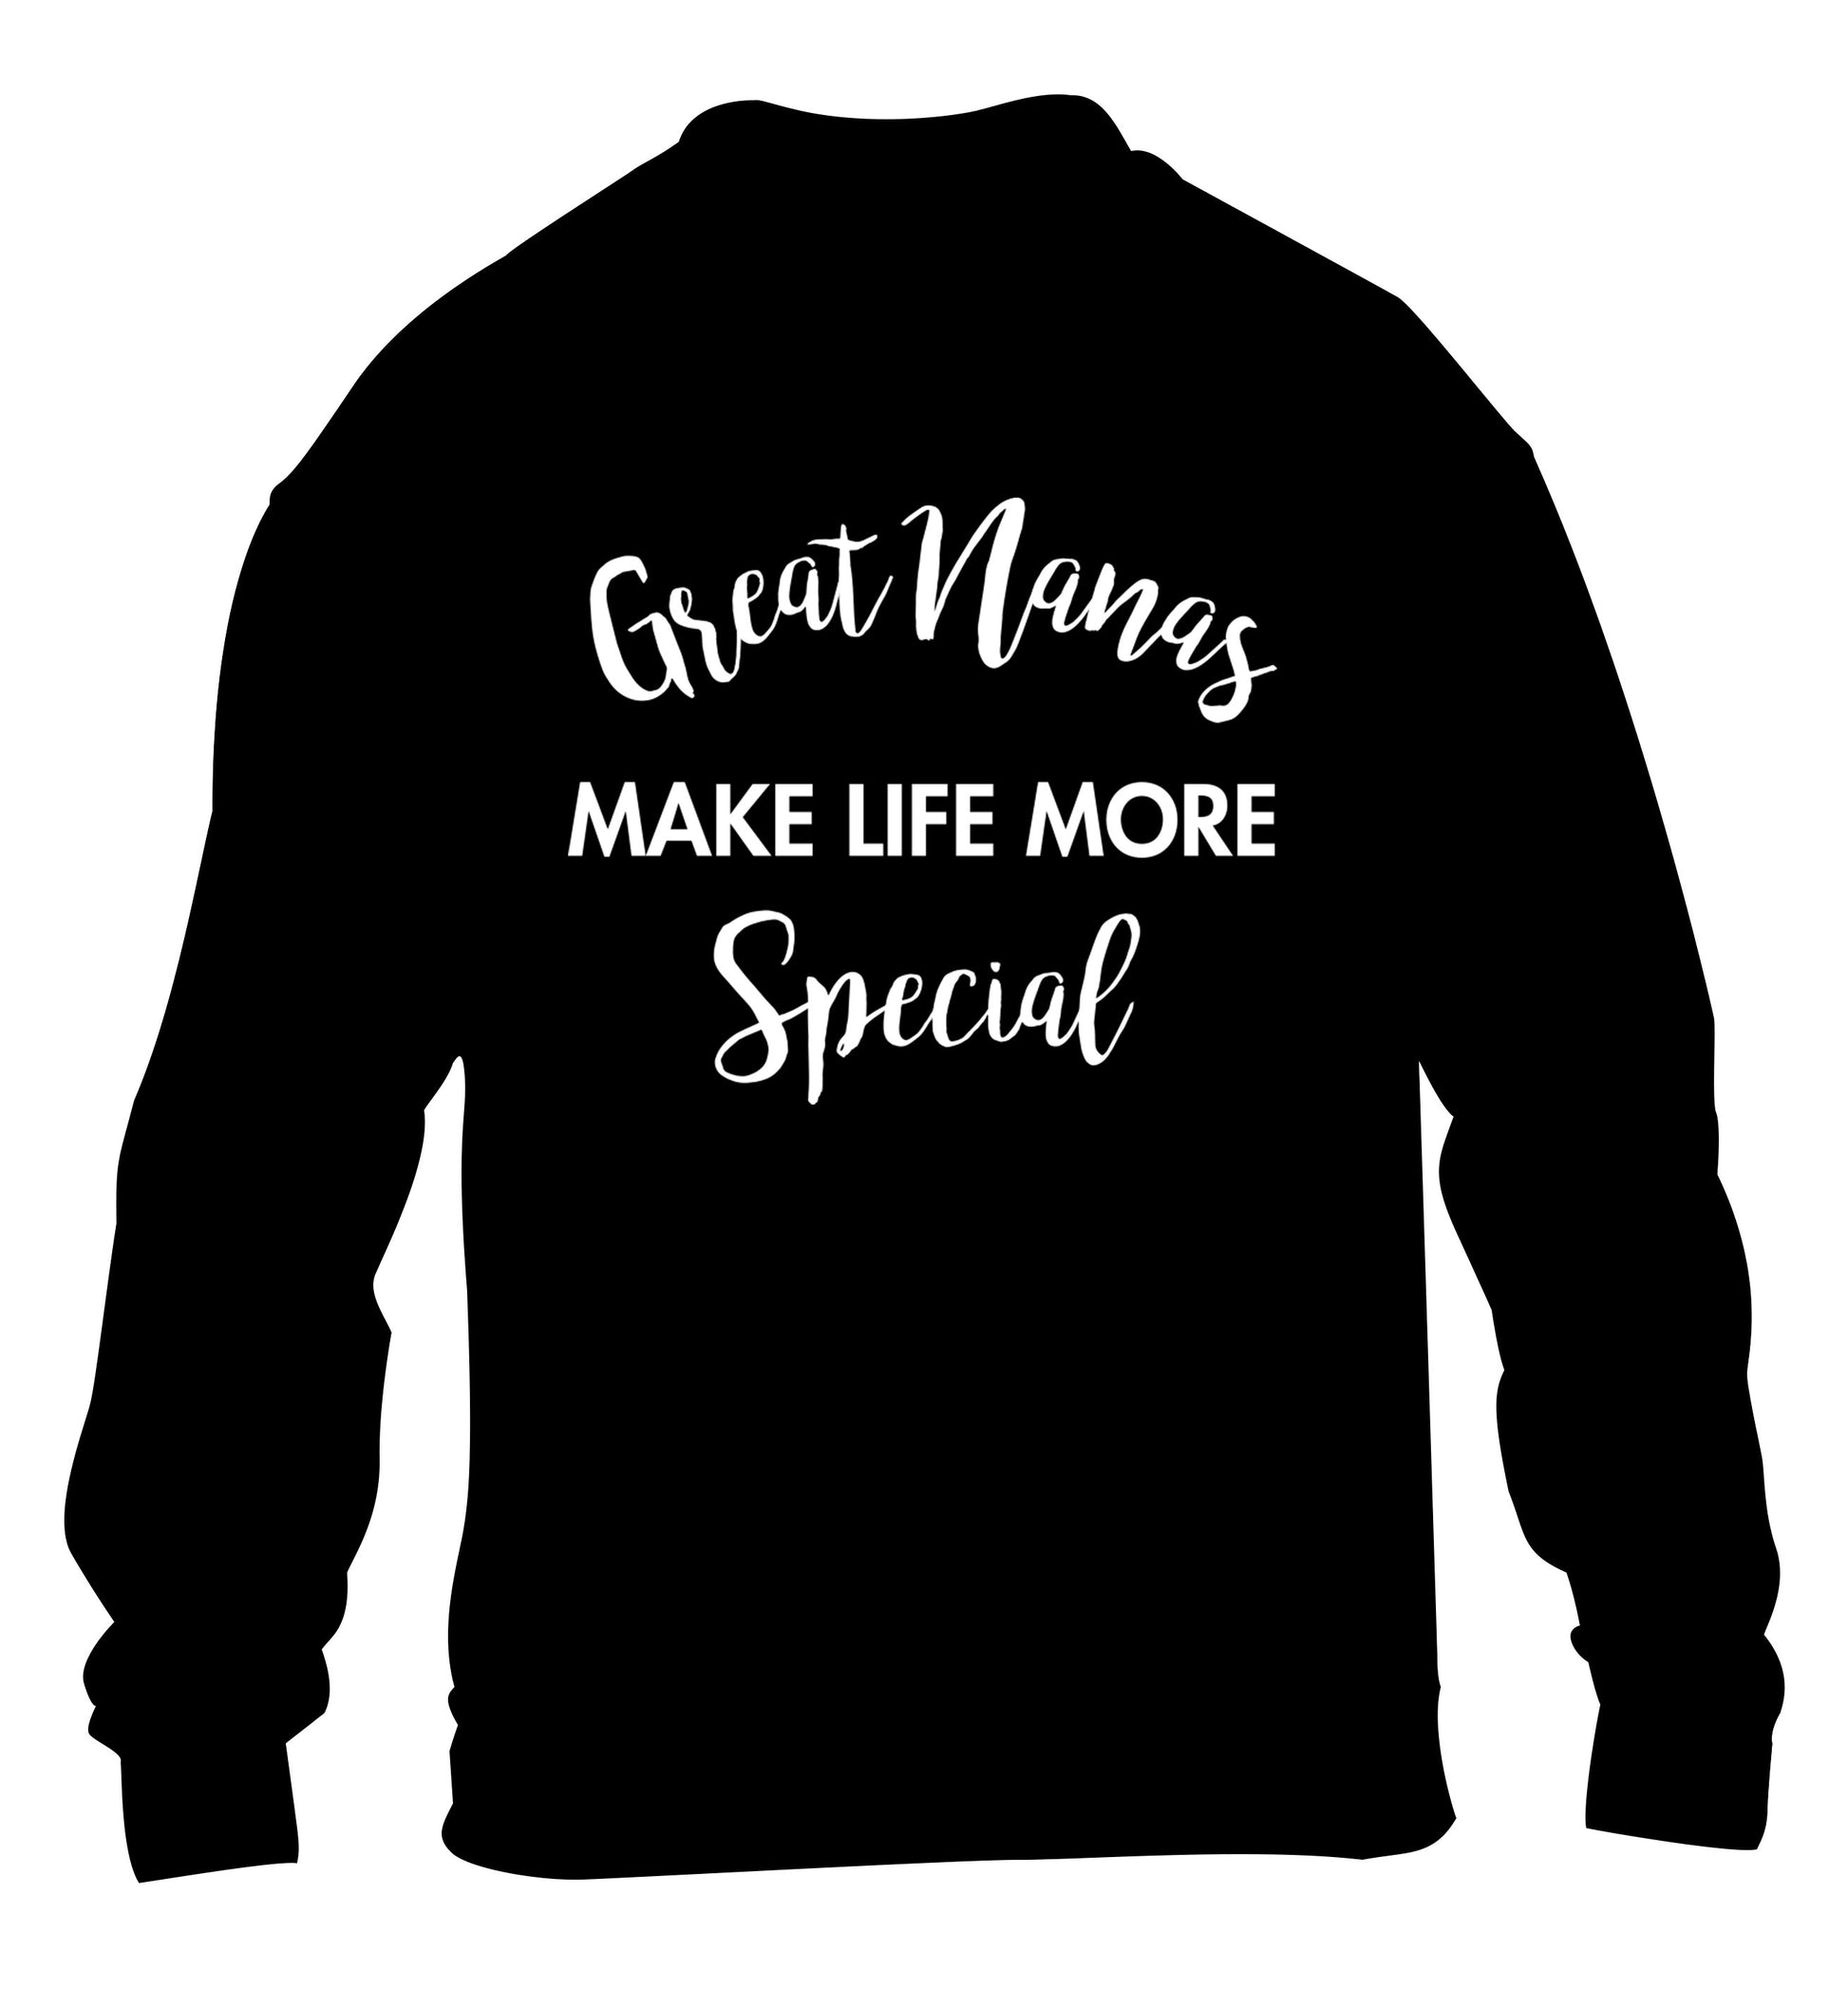 Great nanas make life more special children's black sweater 12-14 Years